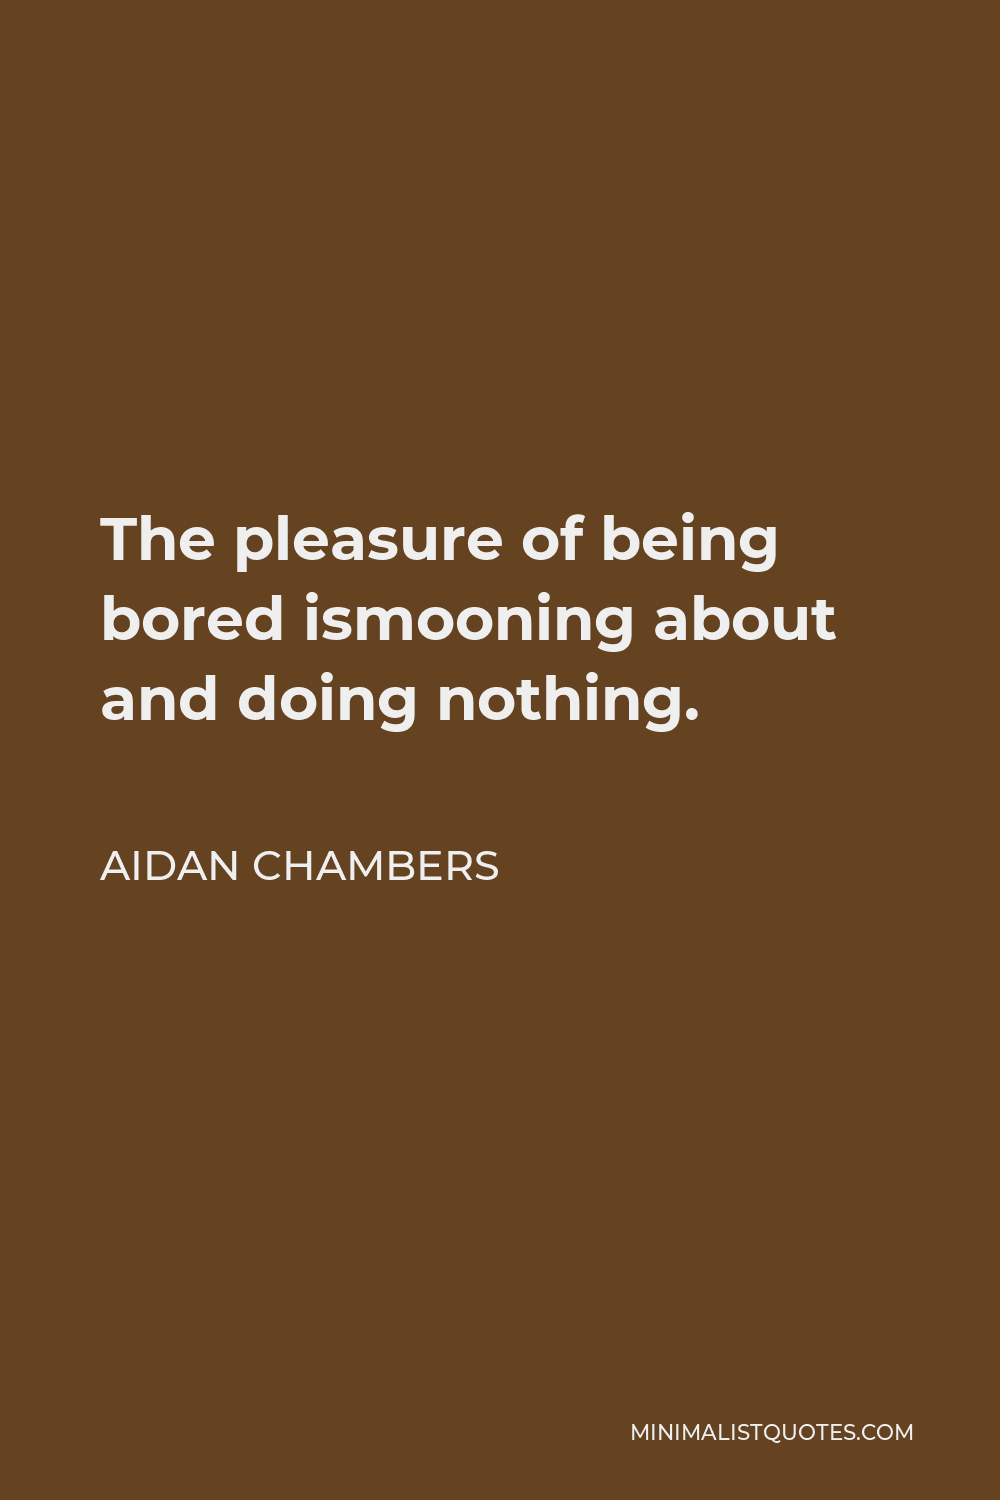 Aidan Chambers Quote - The pleasure of being bored ismooning about and doing nothing.